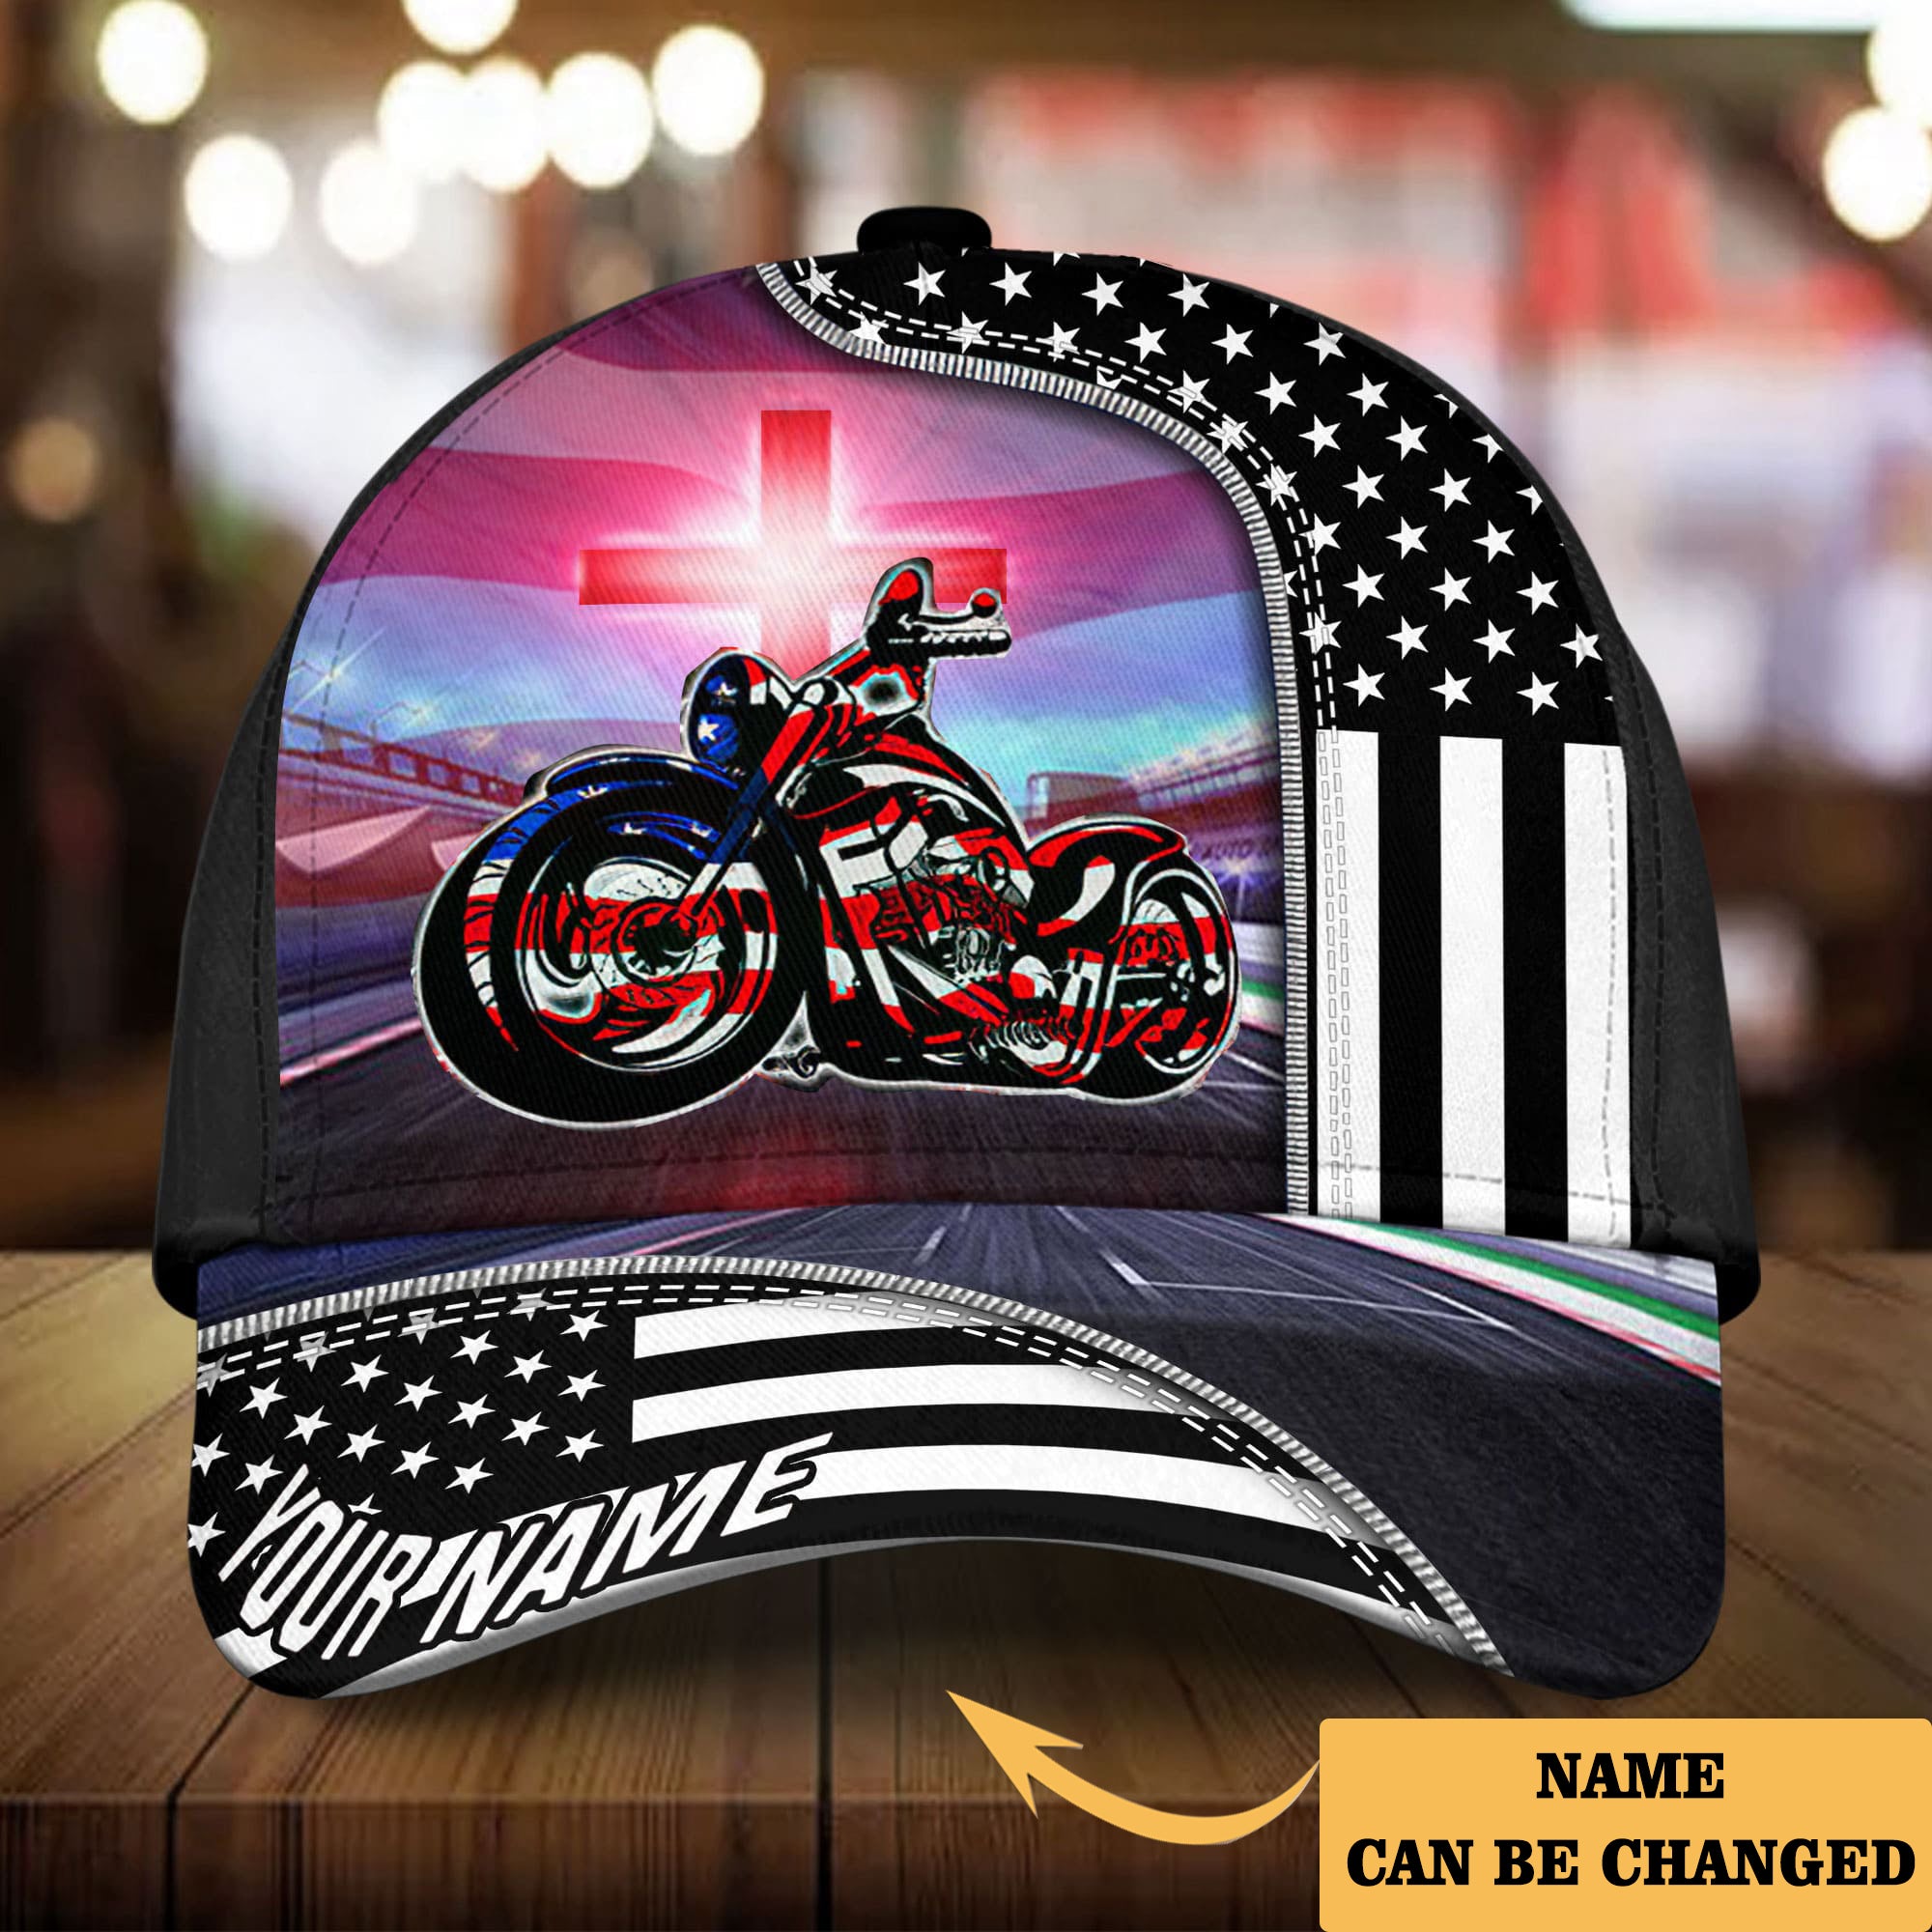 Personalized Racing Motorcycle Cap